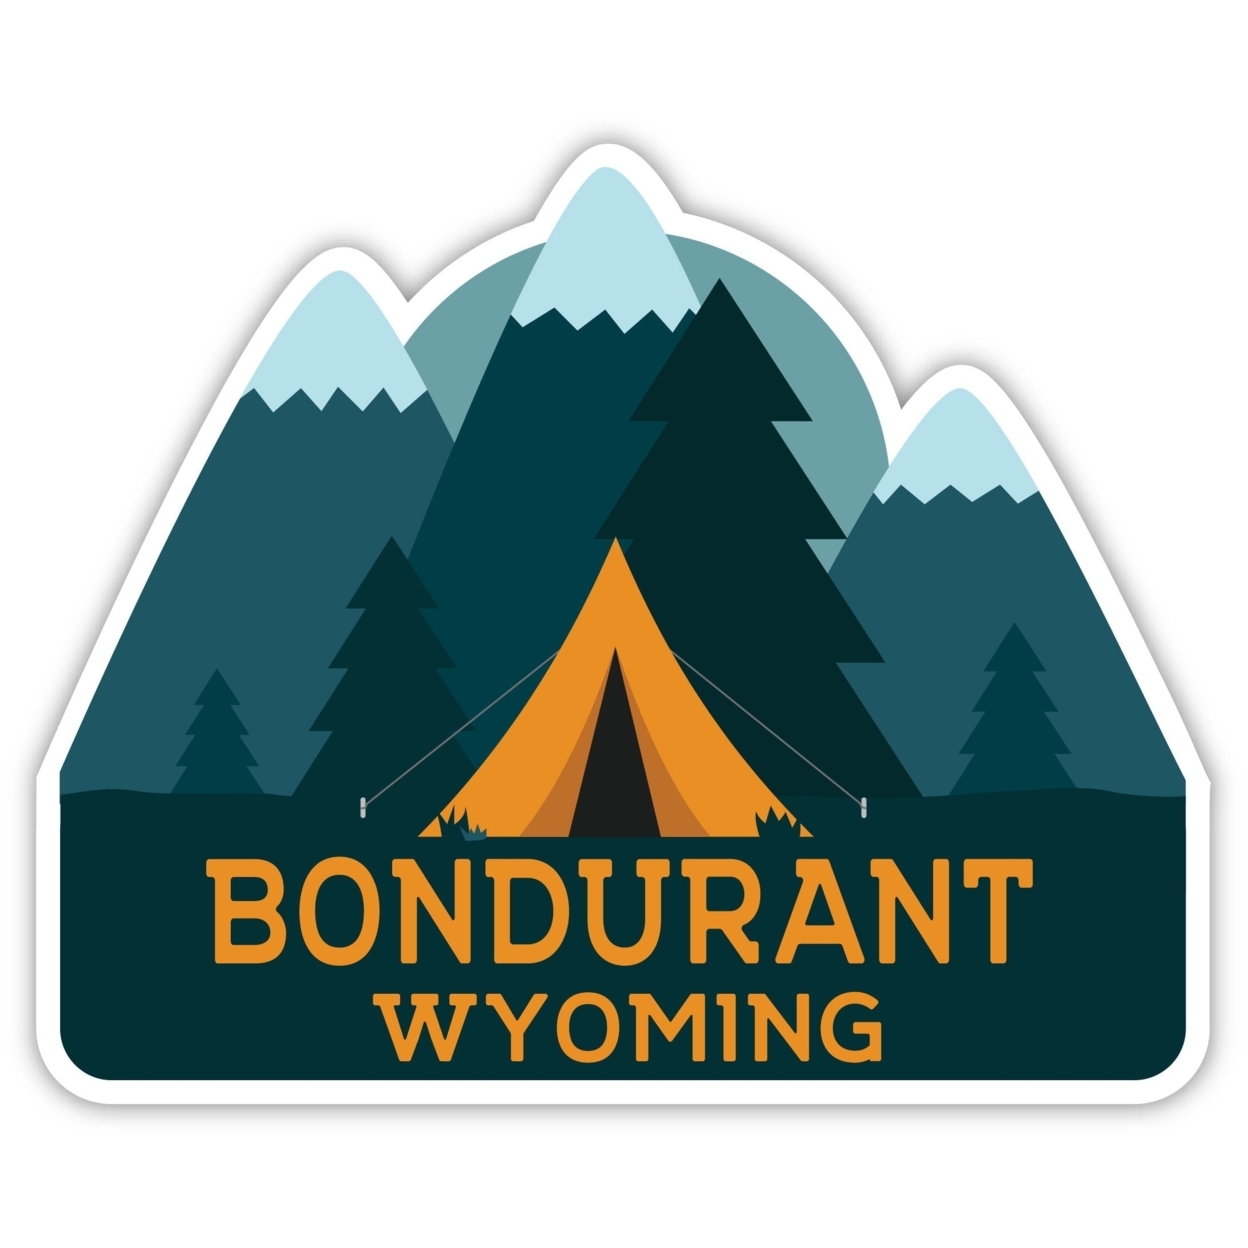 Bondurant Wyoming Souvenir Decorative Stickers (Choose Theme And Size) - 4-Pack, 12-Inch, Tent